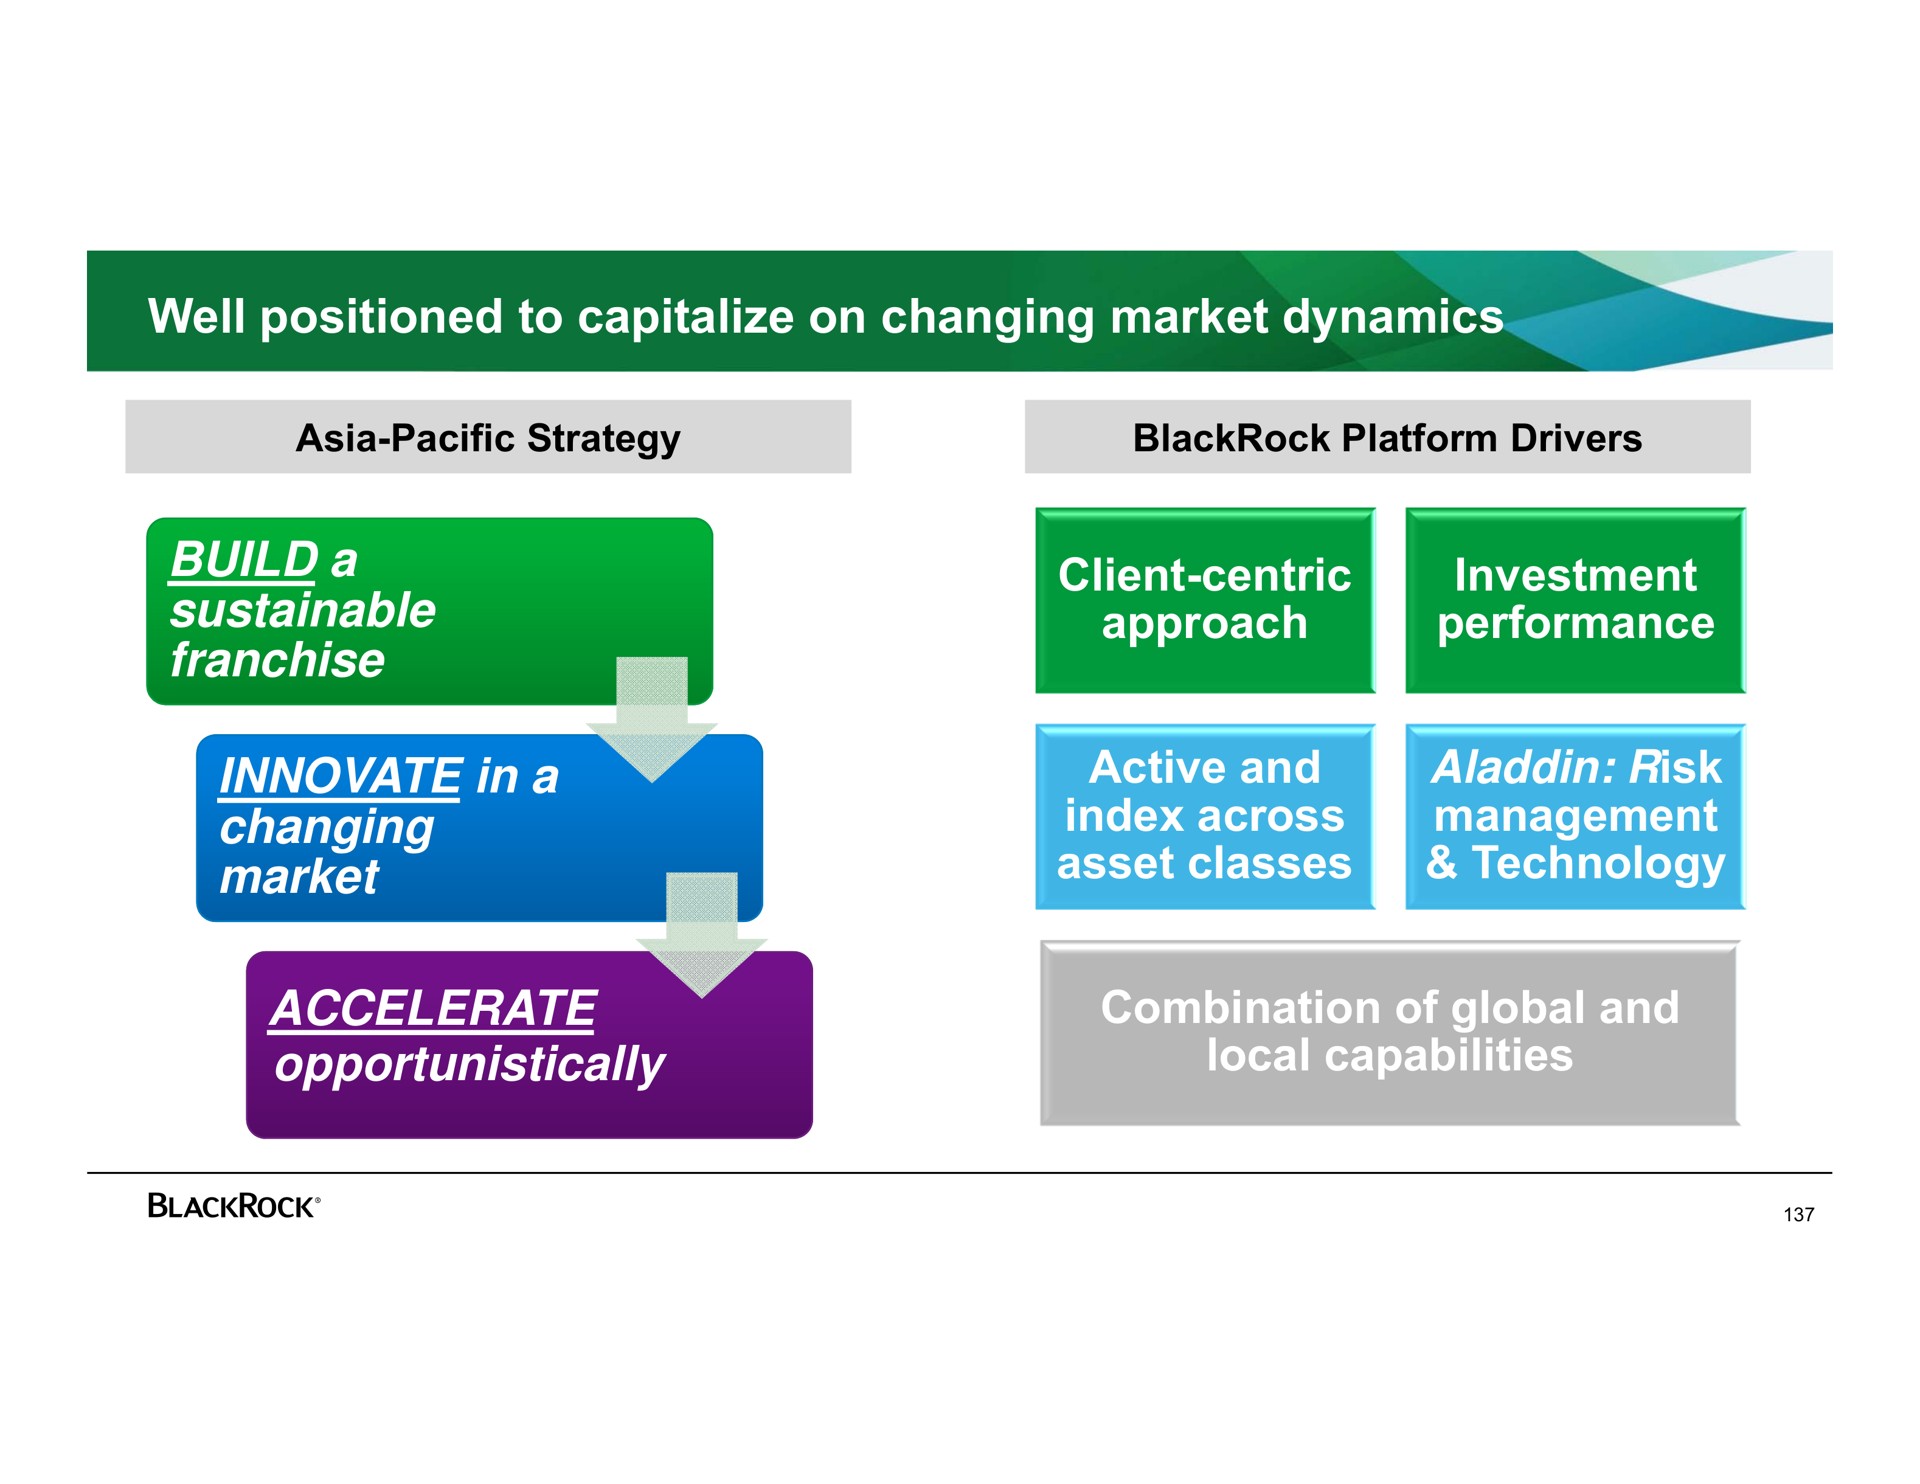 well positioned to capitalize on changing market dynamics build a sustainable franchise innovate in a changing market client centric approach investment performance active and index across asset classes risk management technology accelerate opportunistically combination of global and local capabilities | BlackRock